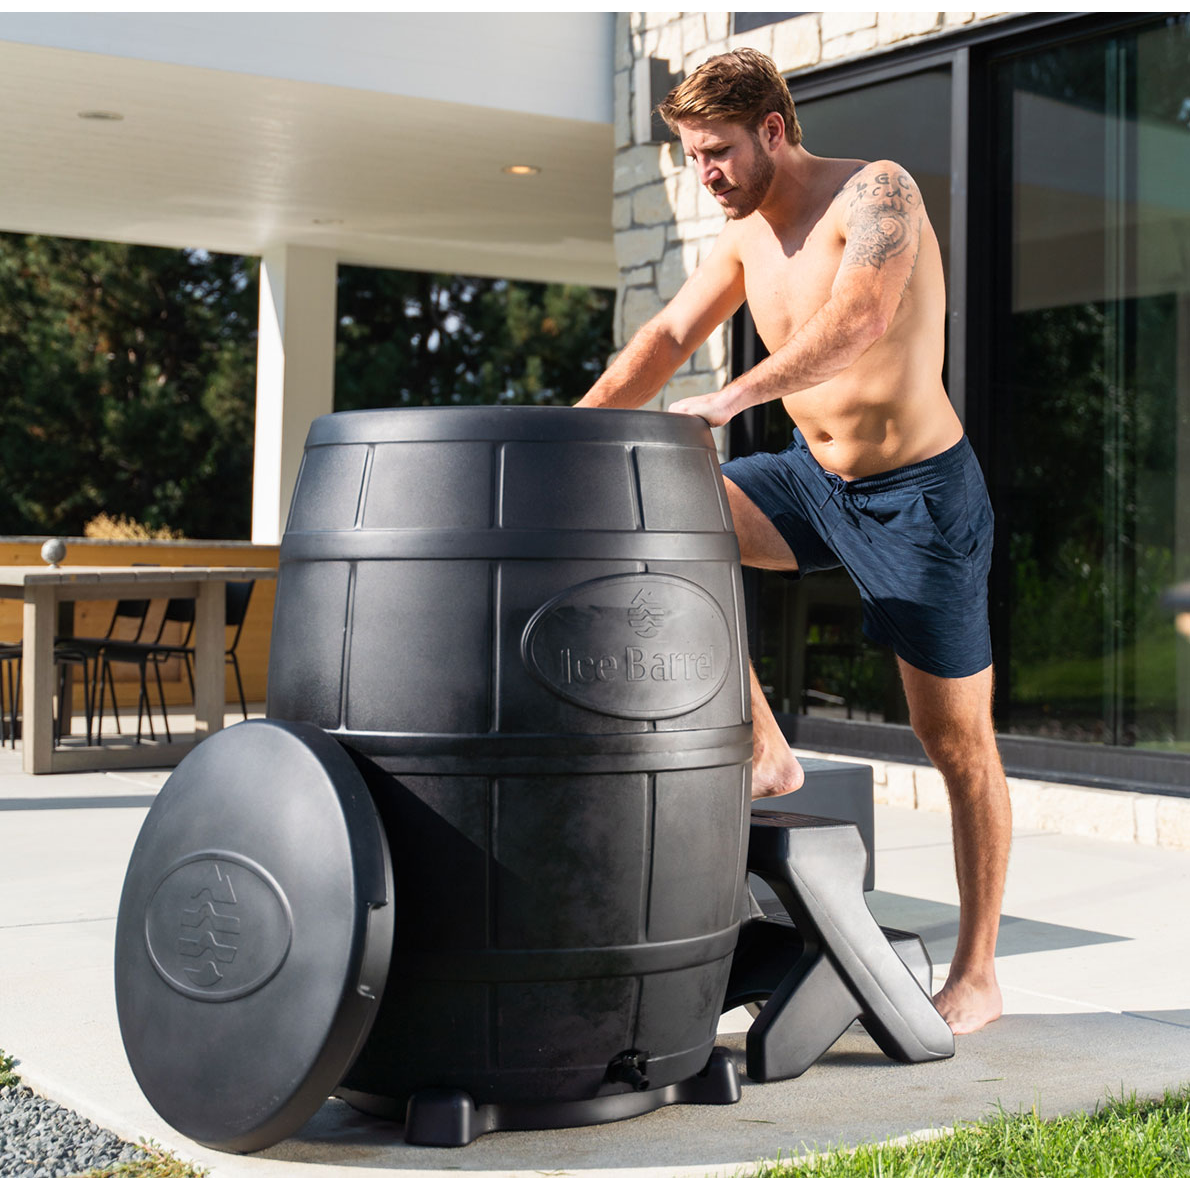 Ice Barrel 400 Cold Therapy PLUS FREE GIFT